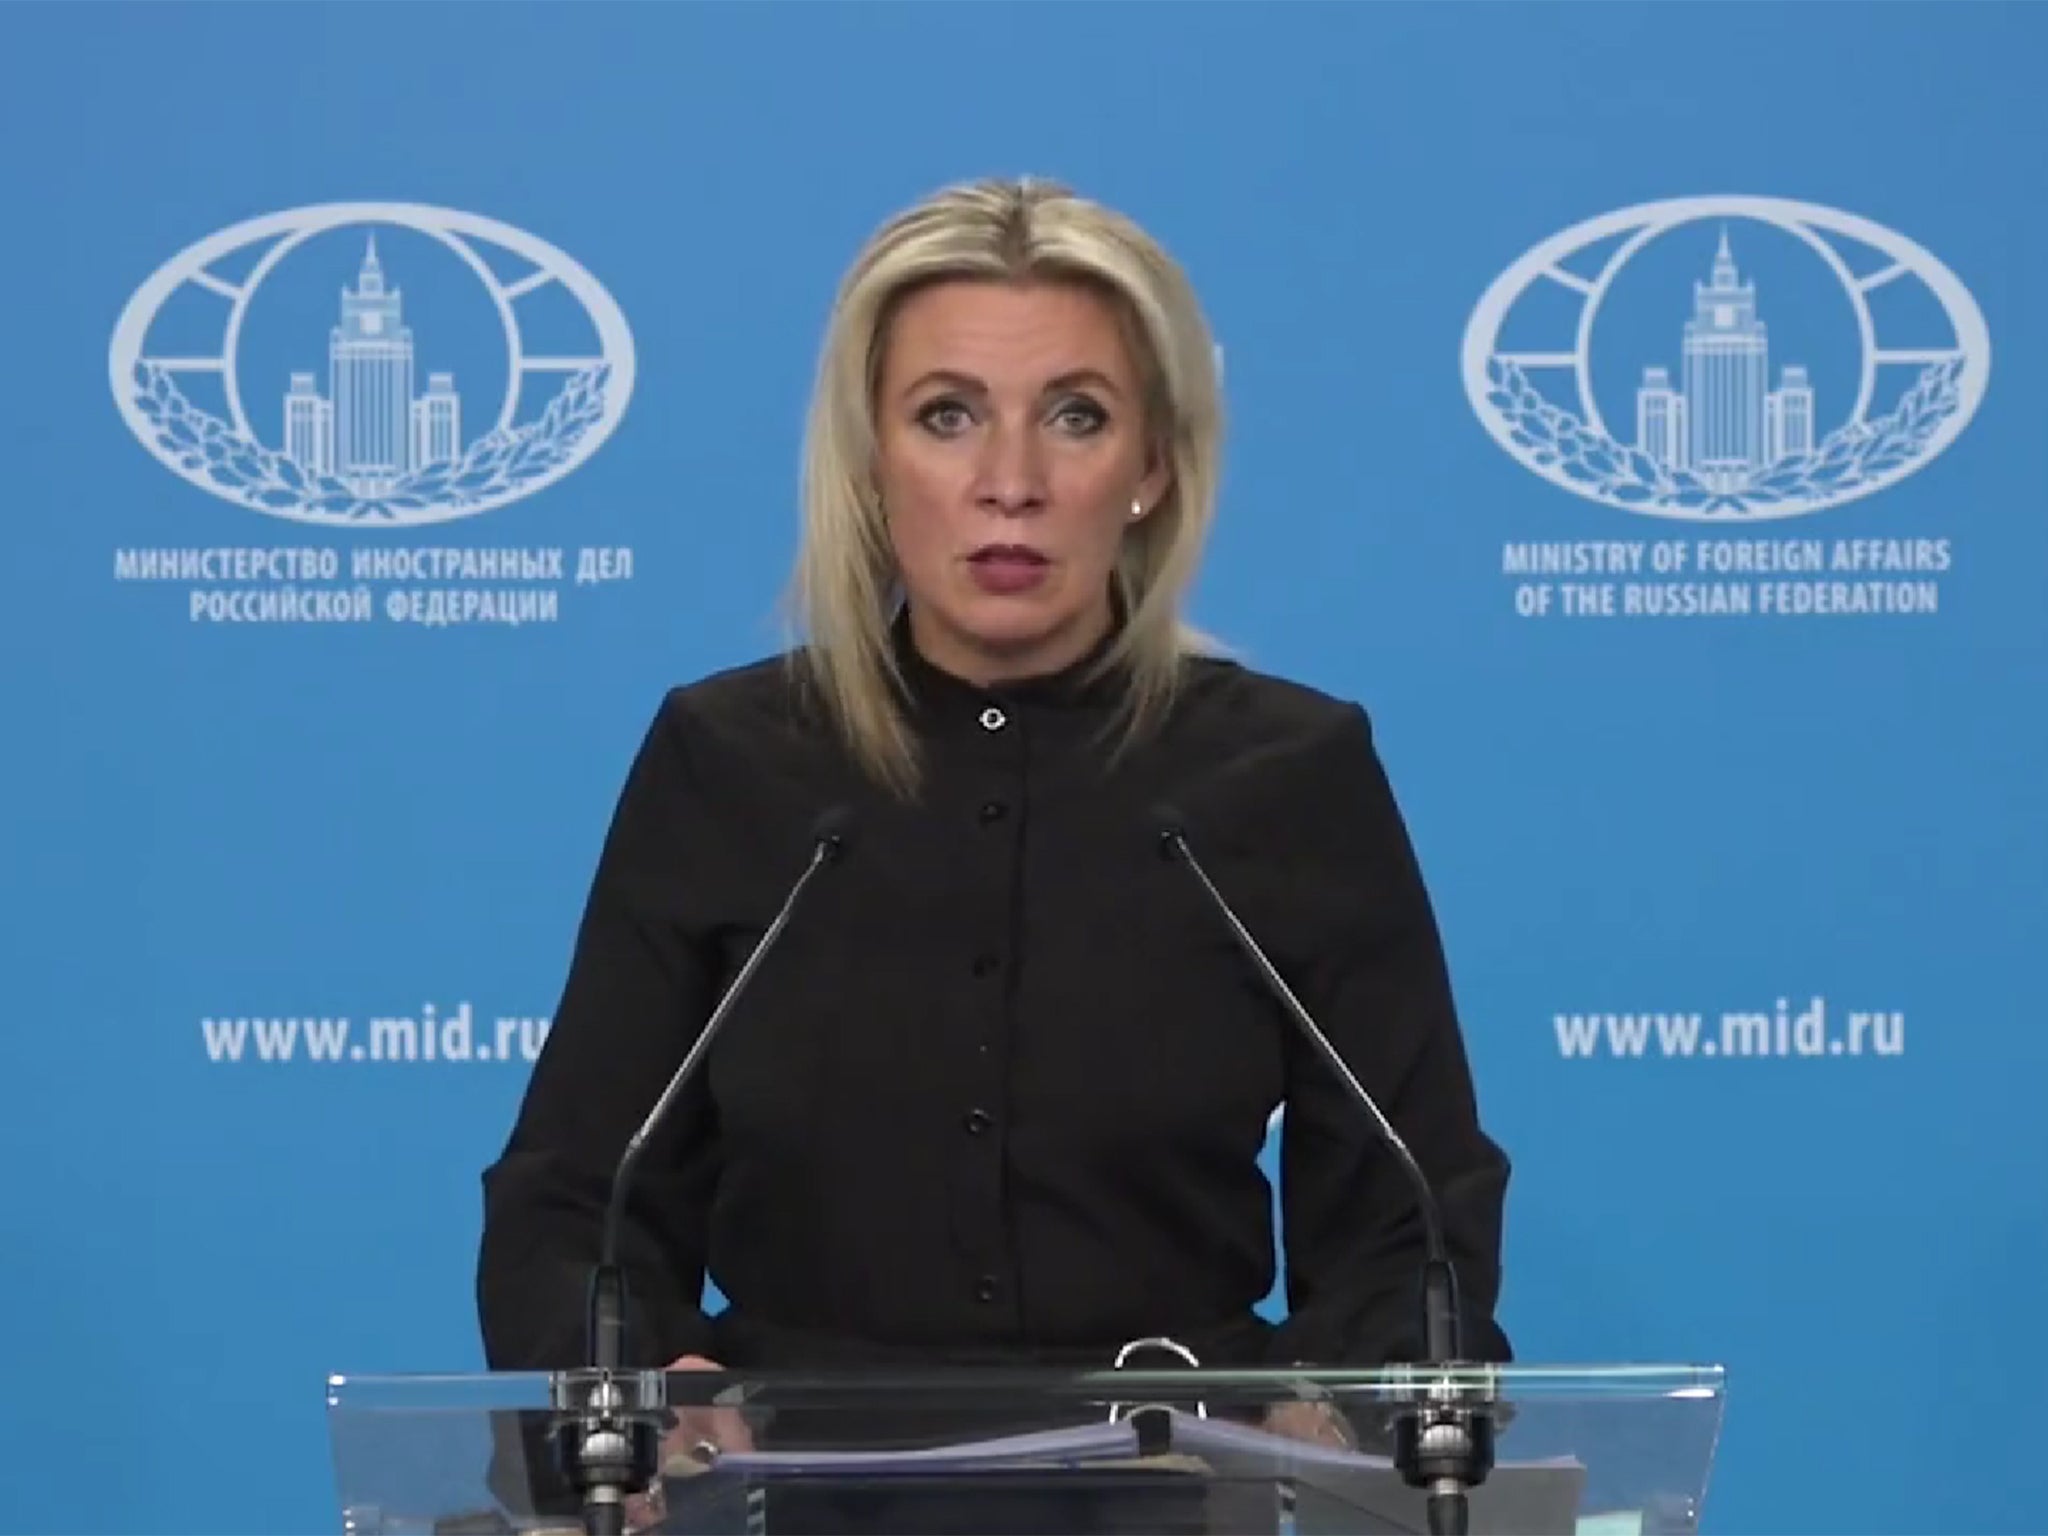 Zakharova at a Foreign Ministry briefing on Thursday